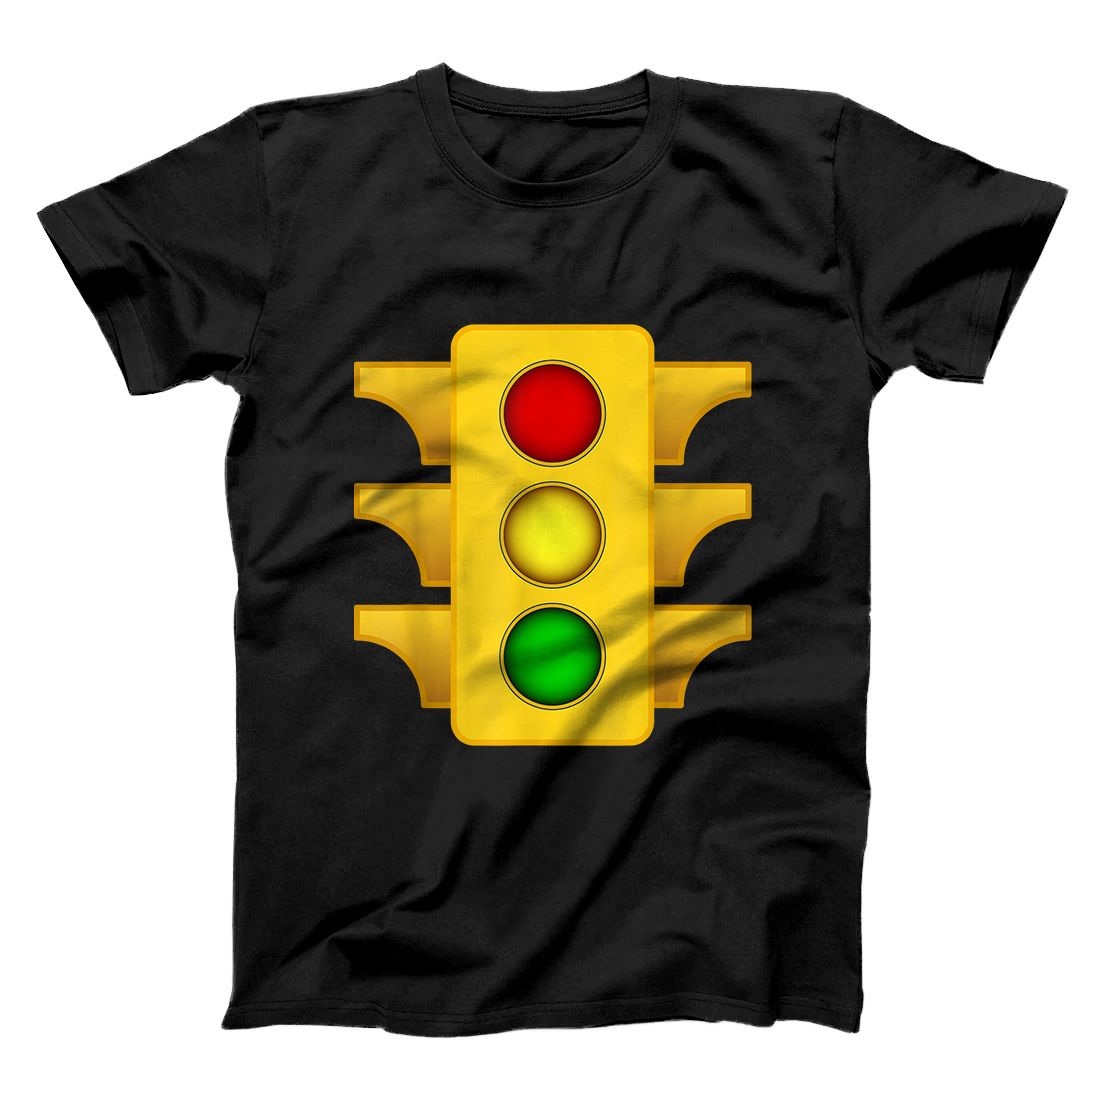 Personalized Halloween Costume Traffic Light funny simple road sign T-Shirt